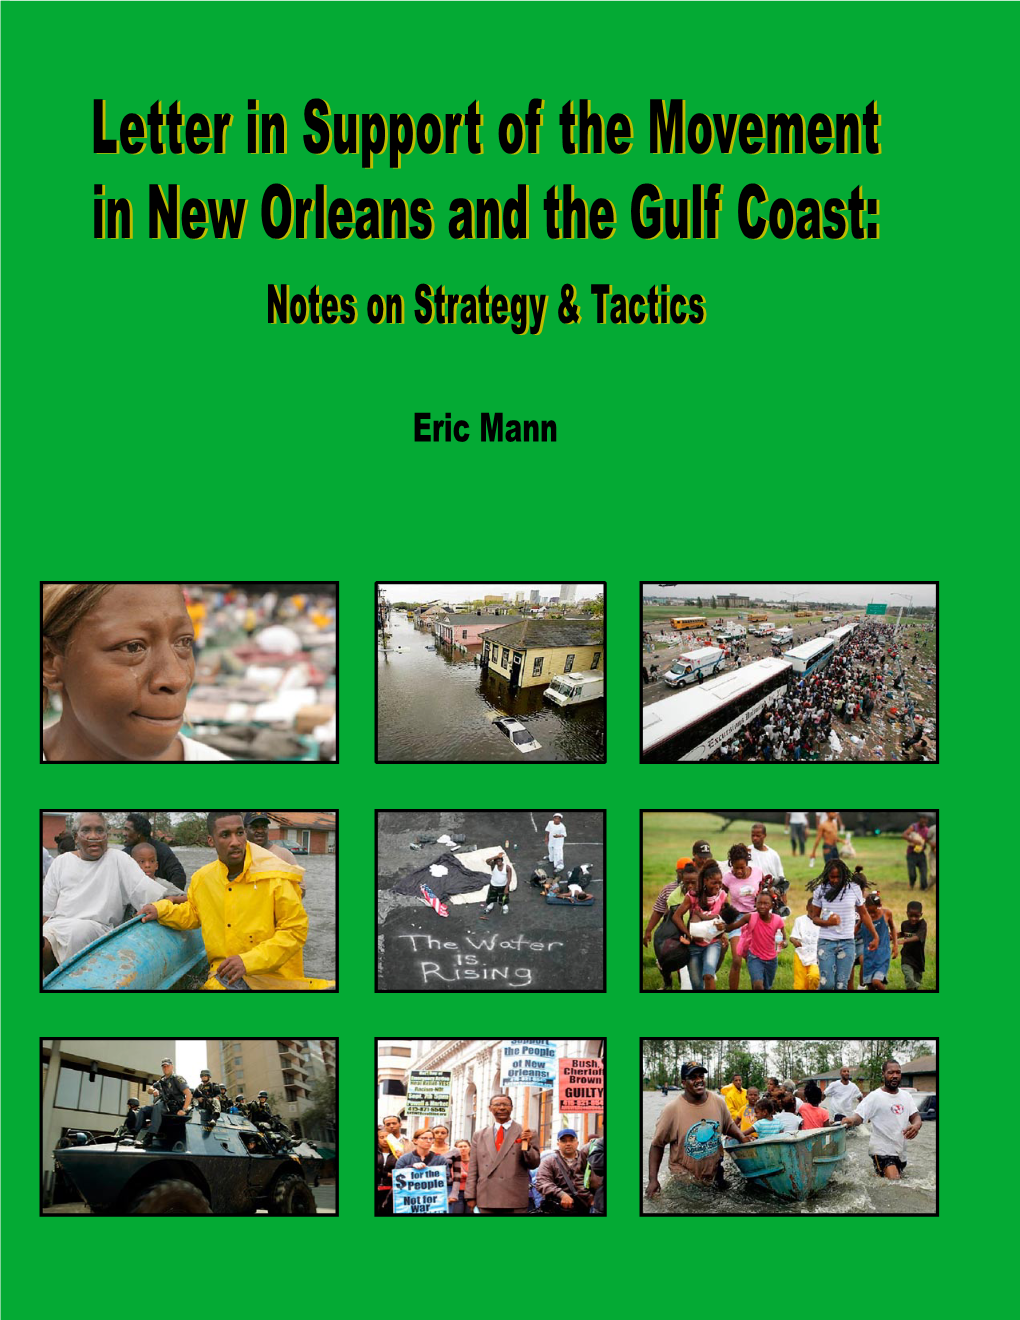 Letter in Support of the Movement in New Orleans and the Gulf Coast: Notes on Strategy & Tactics